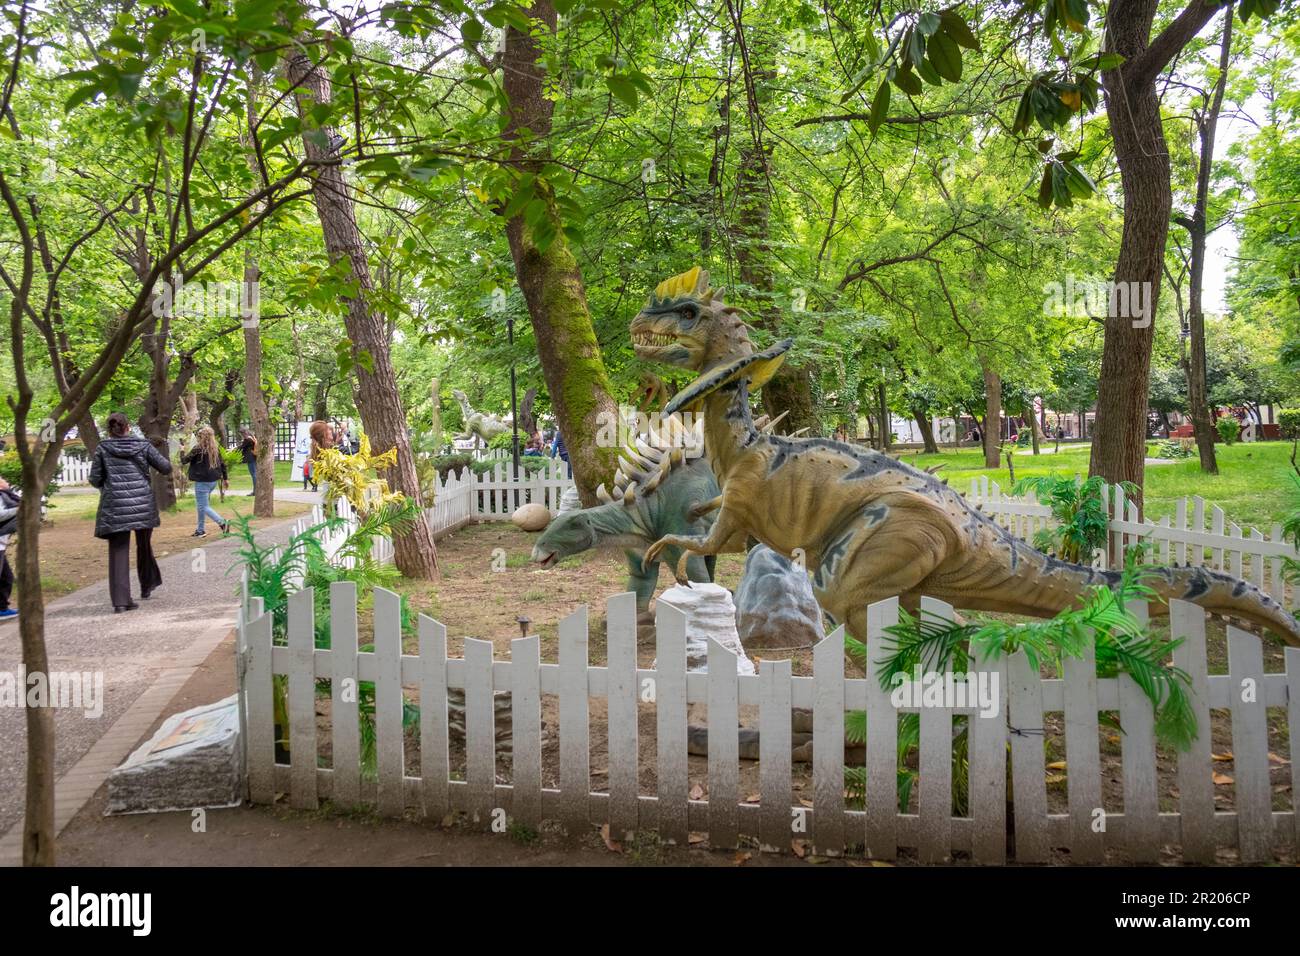 Adults and kids staring the animatronic or robotic dinosaurs in a park Stock Photo